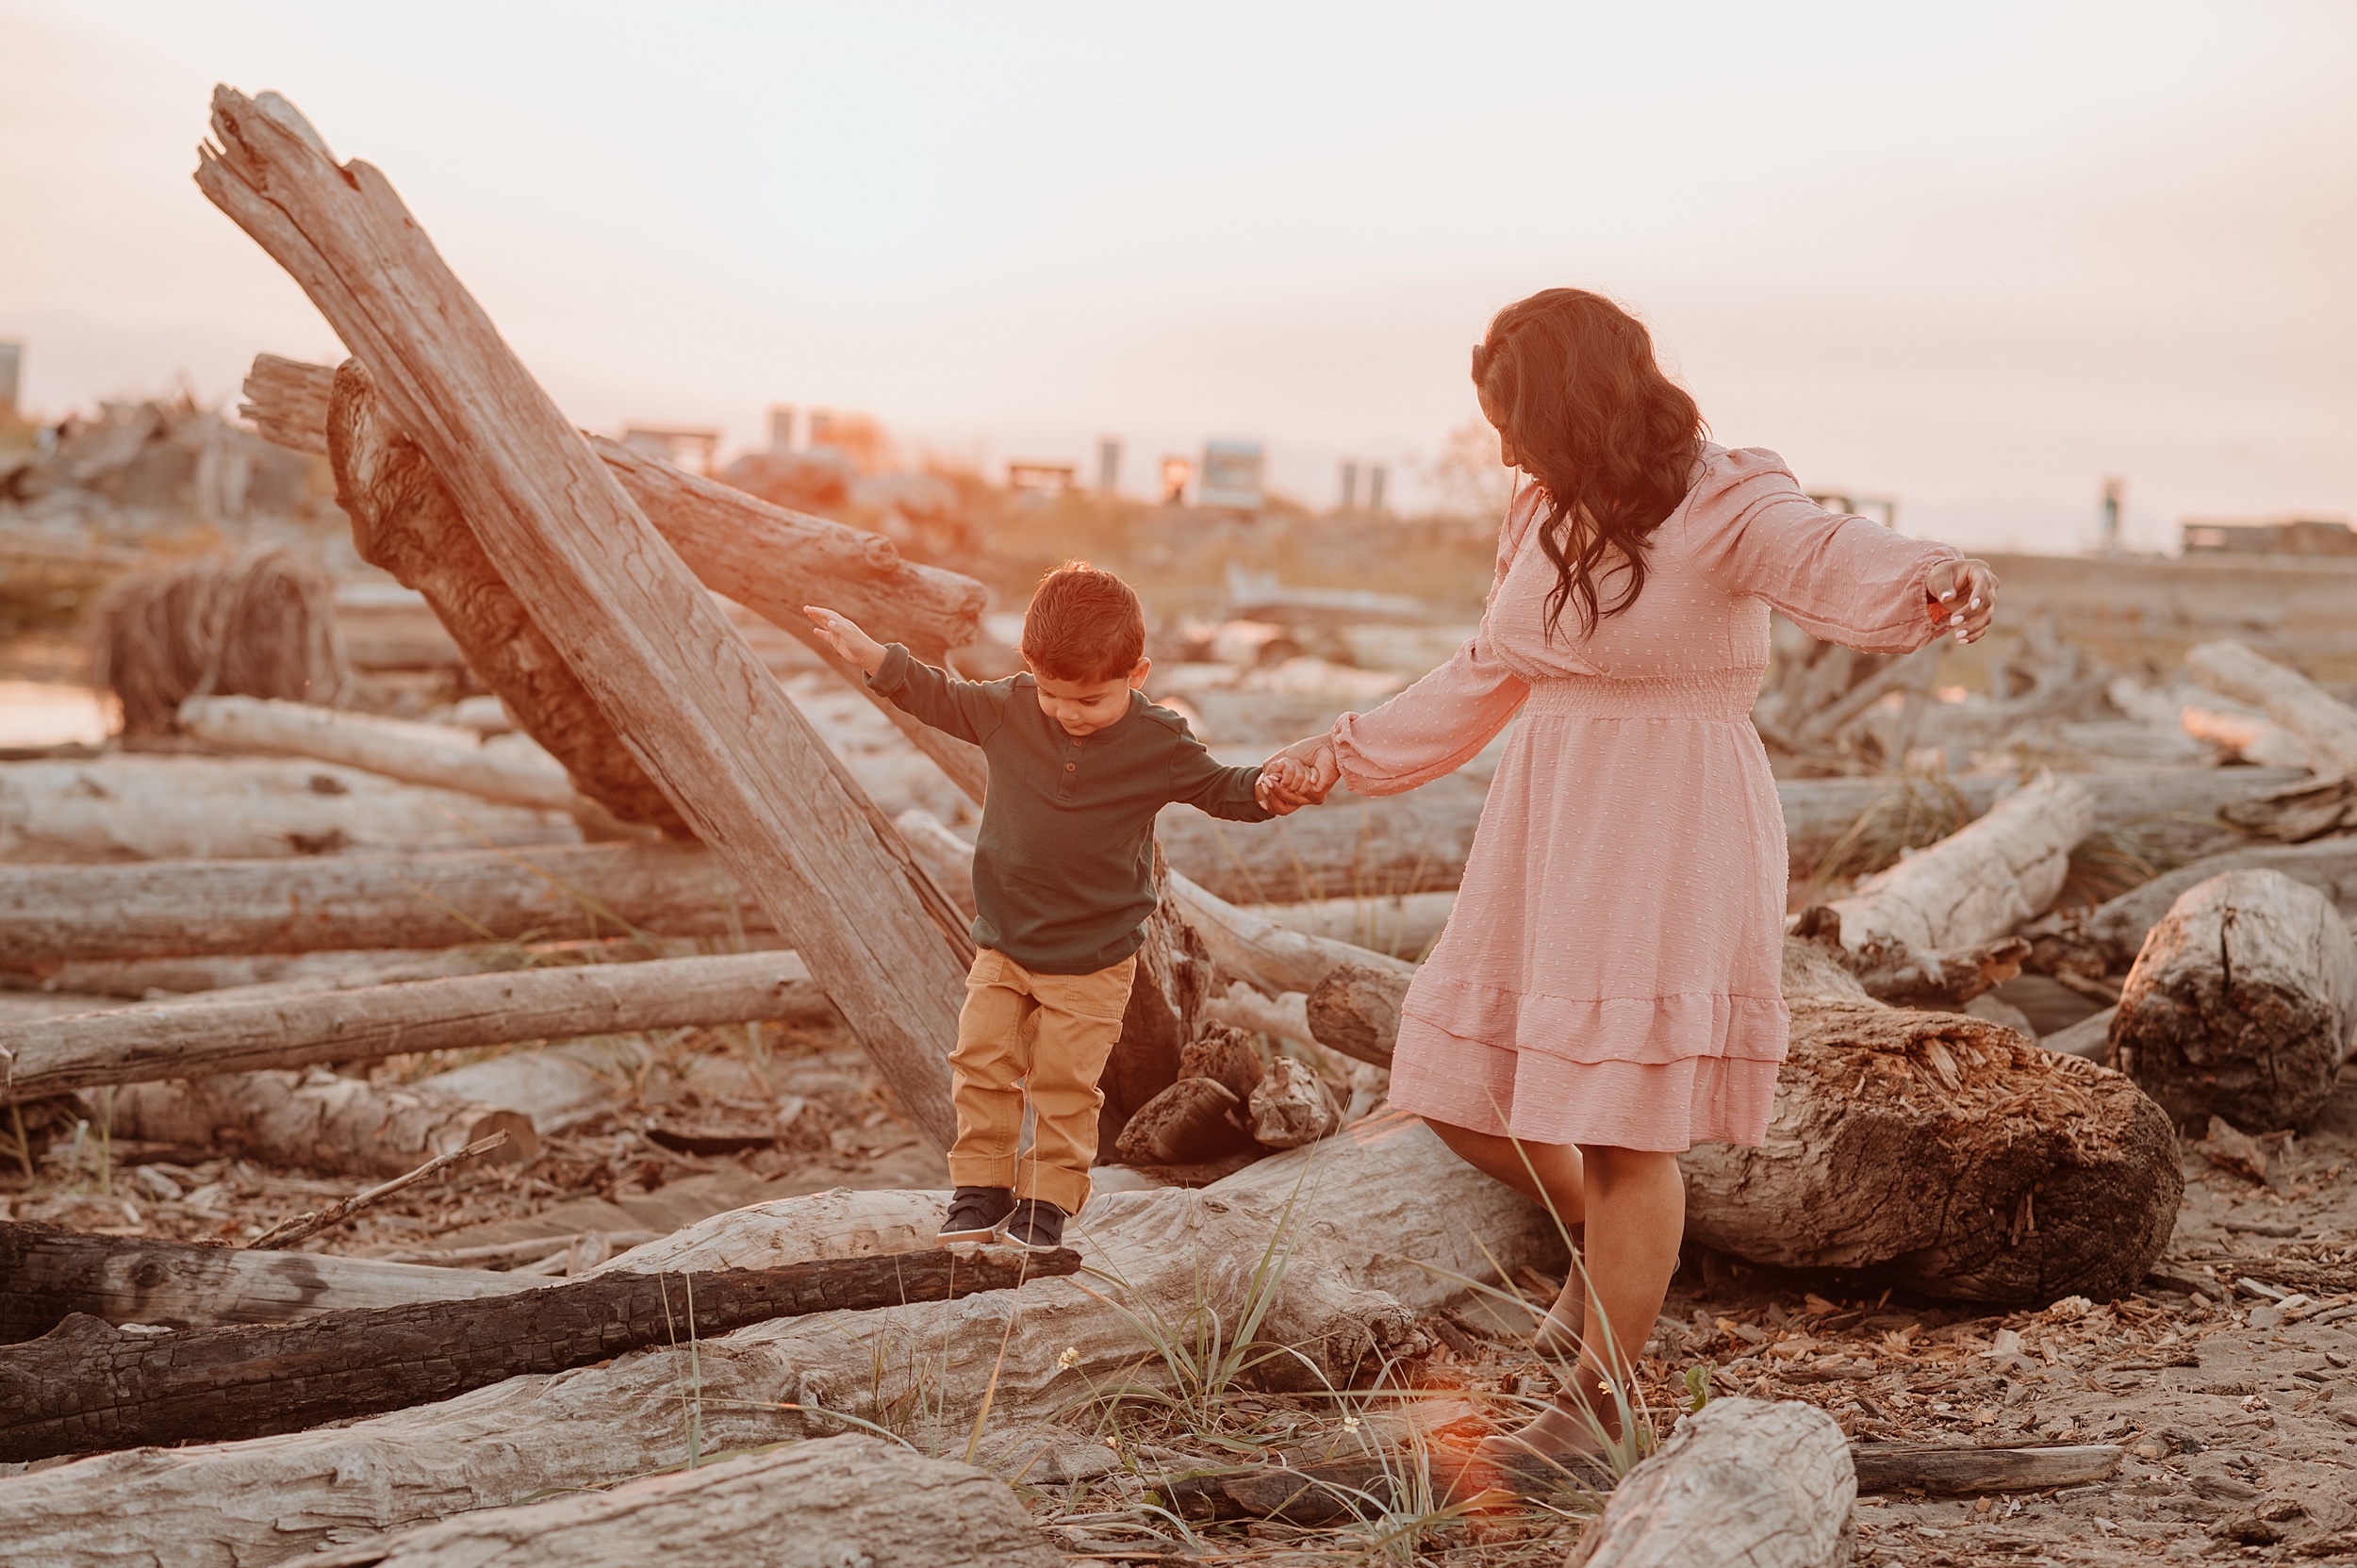 A mother in a pink dress helps her toddler son balance on driftwood logs on a beach on one of the kid friendly hikes vancouver